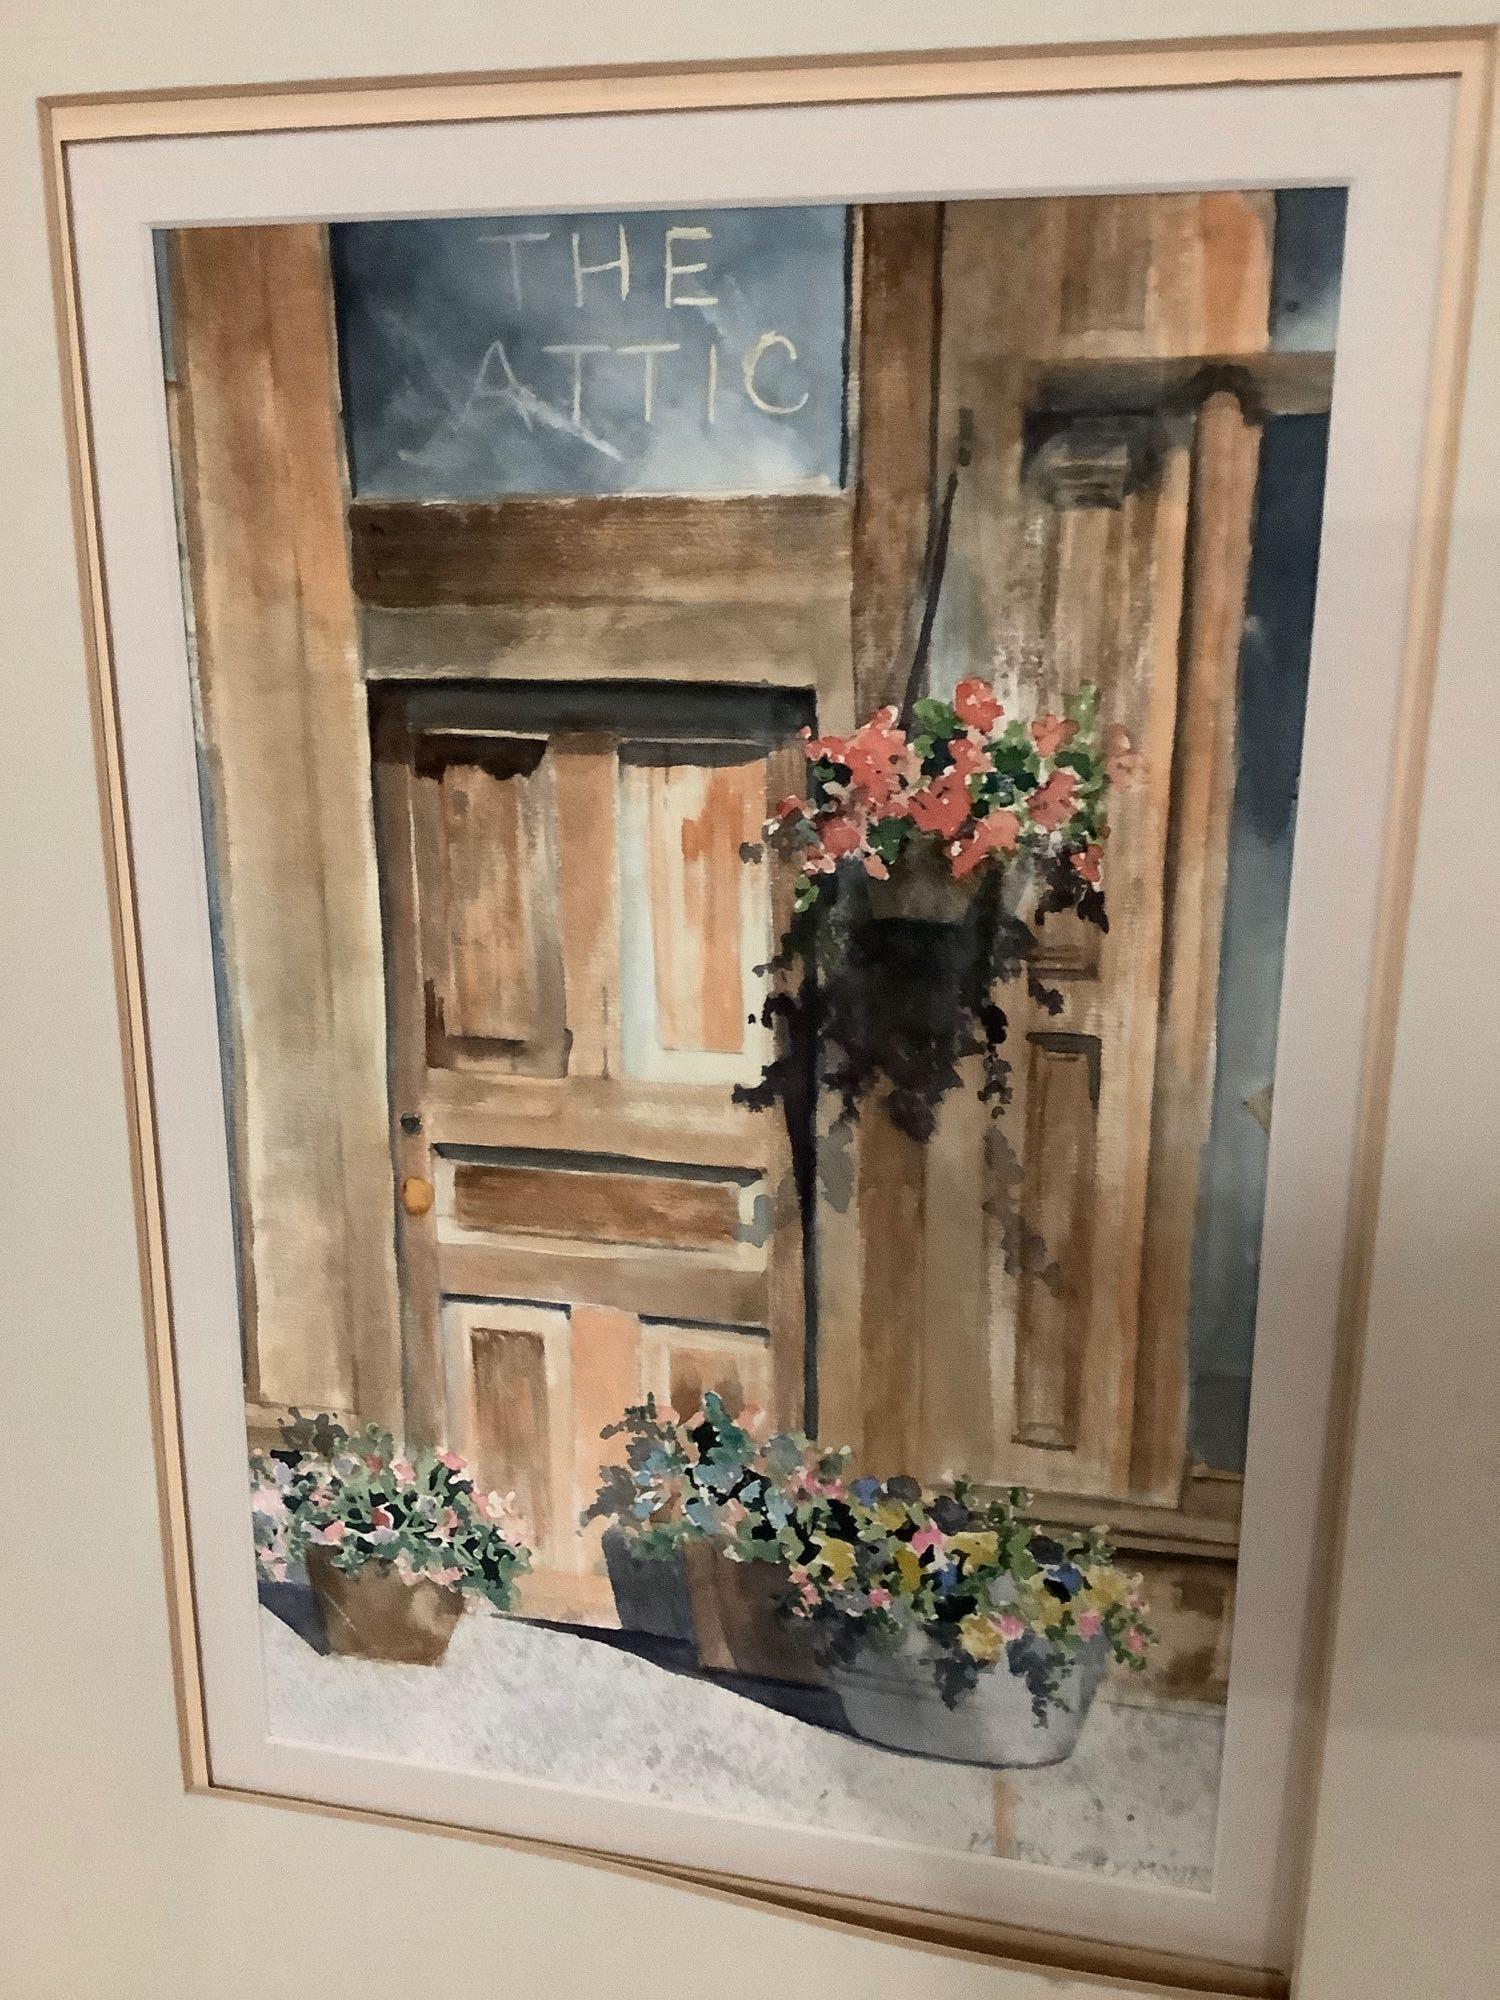 Original watercolor painting - Welcome by Mary Seymour, approx 16.5x20 inches